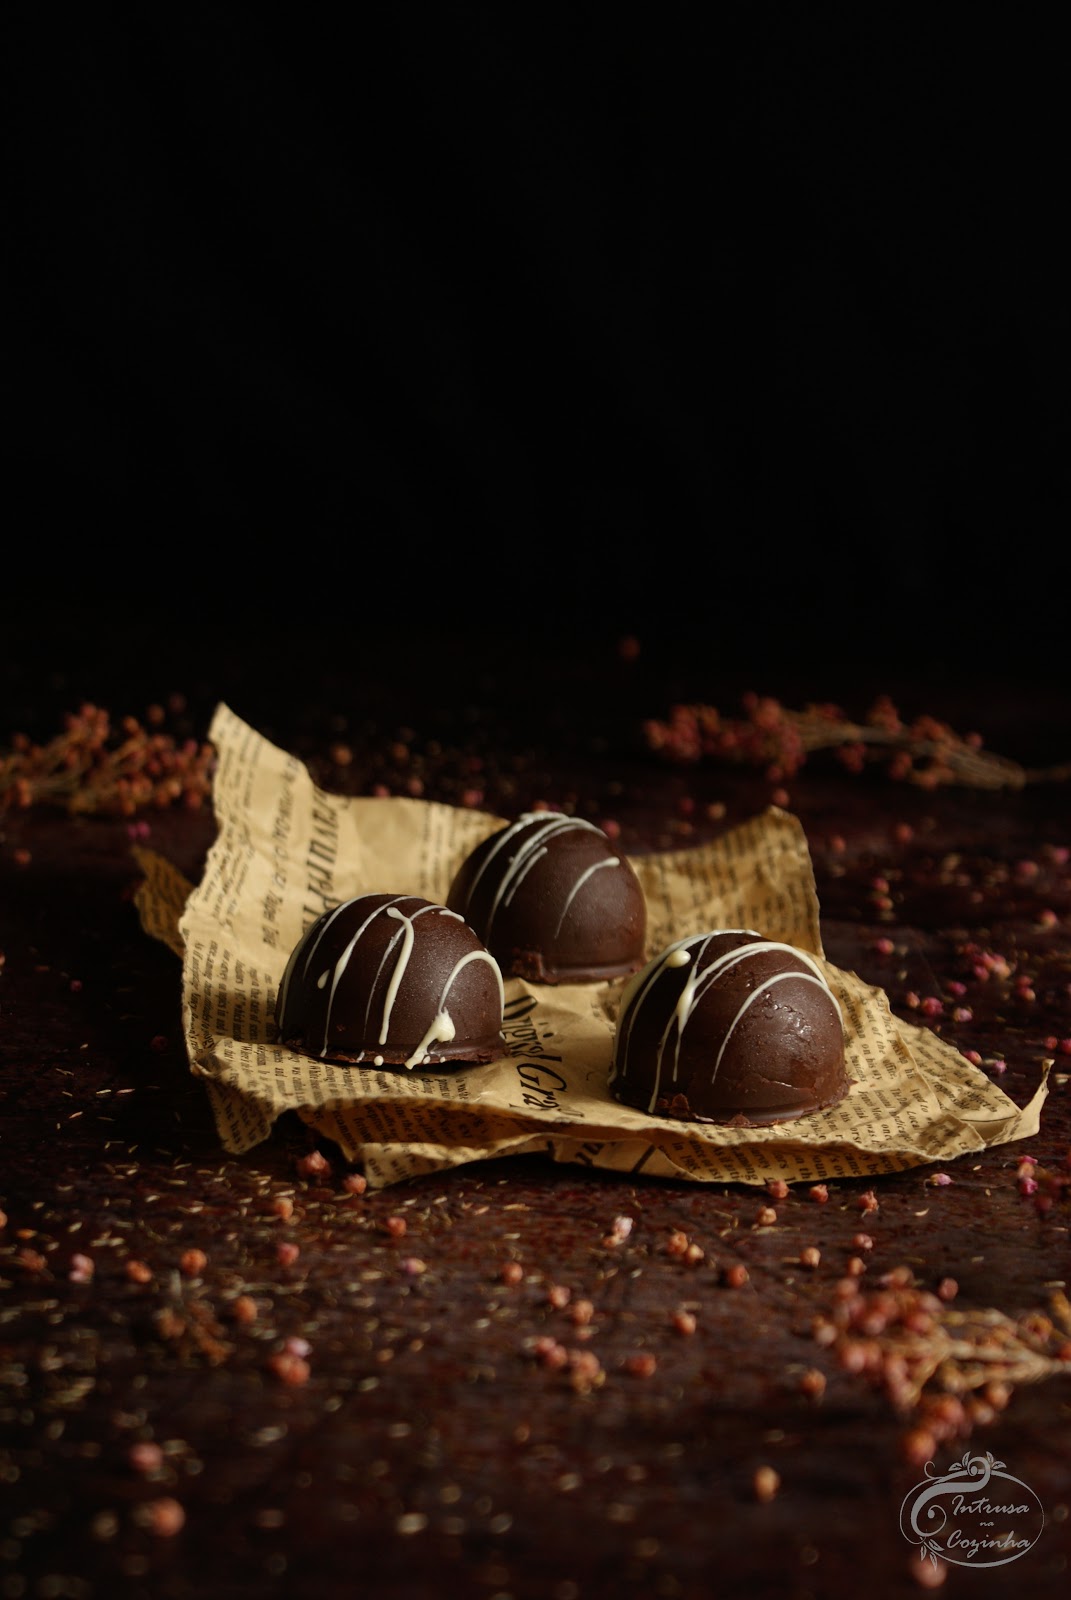 Bombons de Chocolate e Mousse de Framboesa  {Chocolate and Raspberry Mousse Candy}